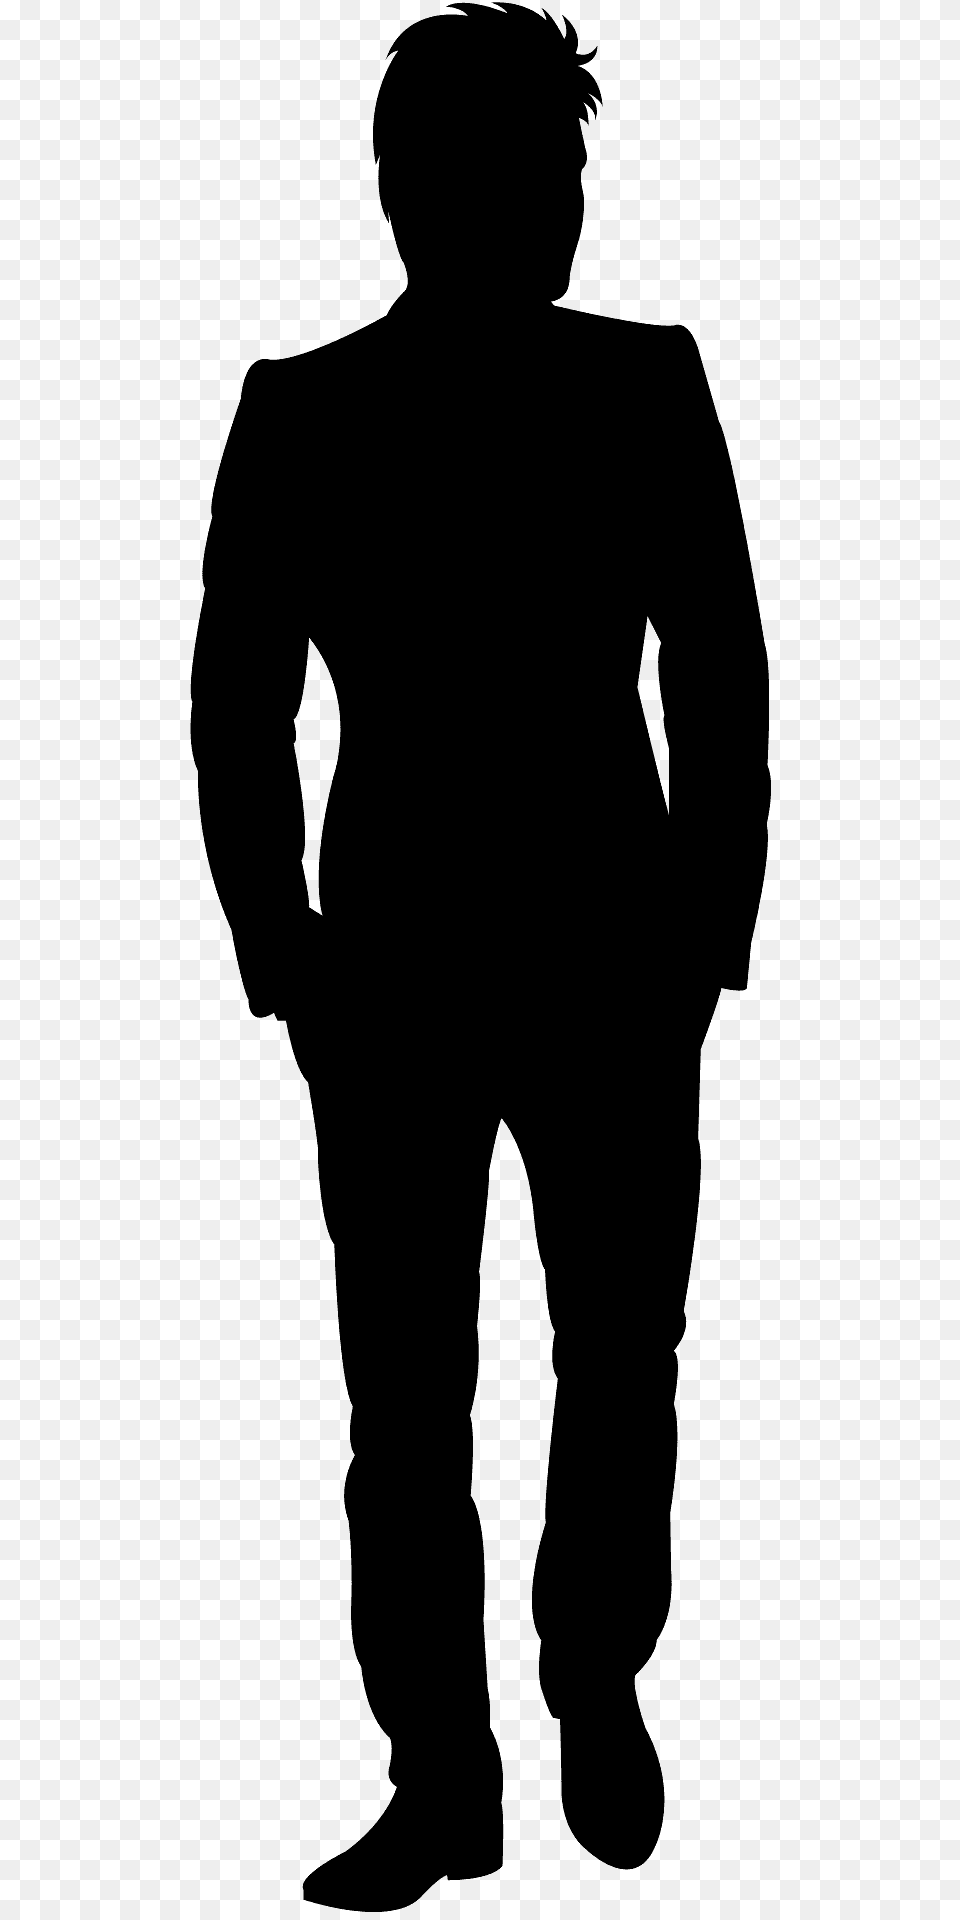 Jared Leto Silhouette, Clothing, Pants, Adult, Male Png